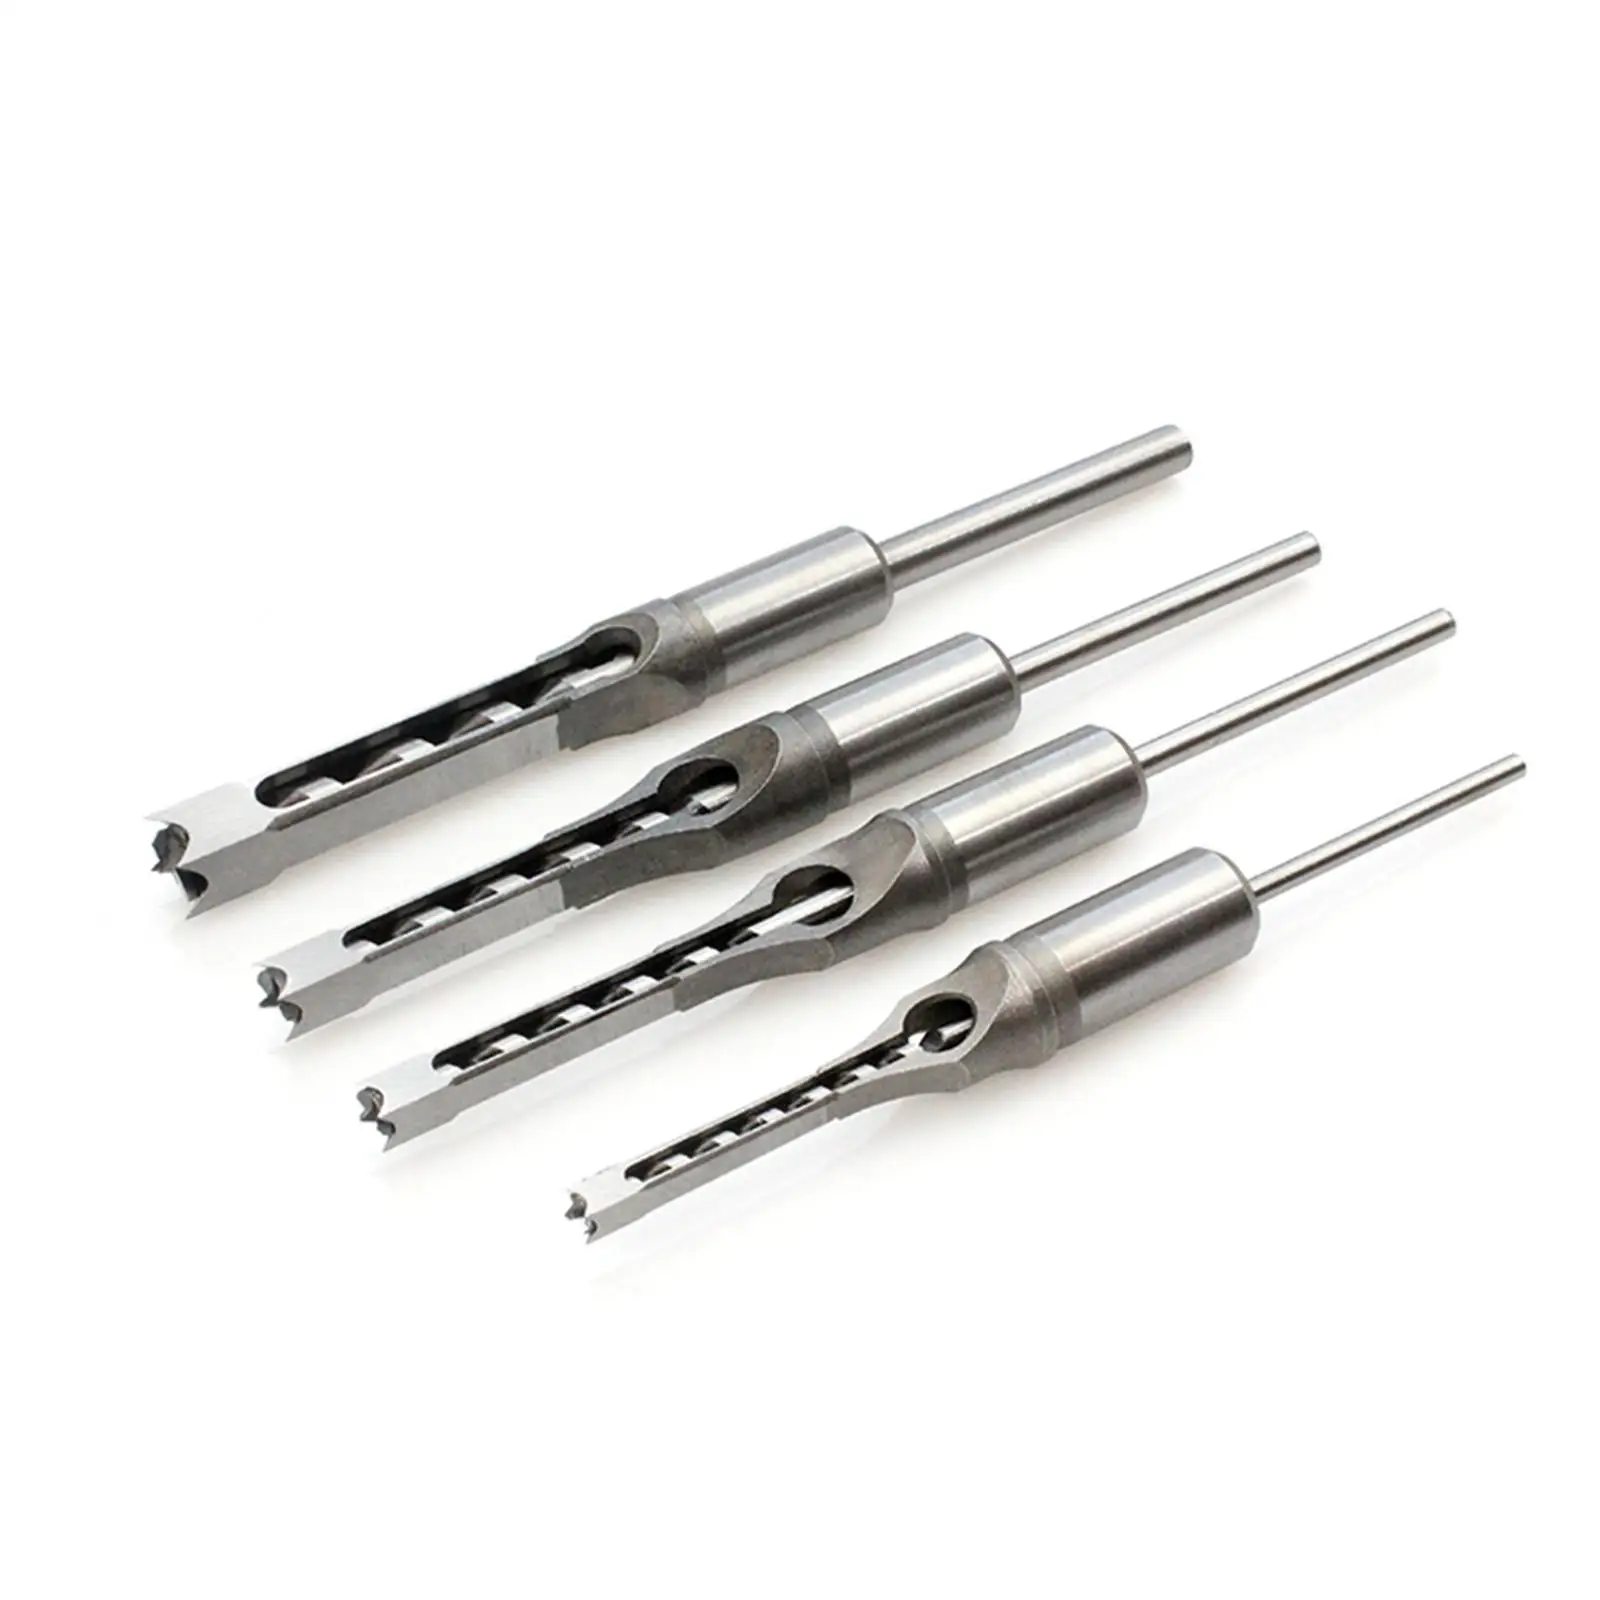 

4Pcs Square Hole Drill Bits HSS Auger Mortising Chisel Set Square Extended Saw Tenon Mortise Woodworking Twist Drill Bits Tool